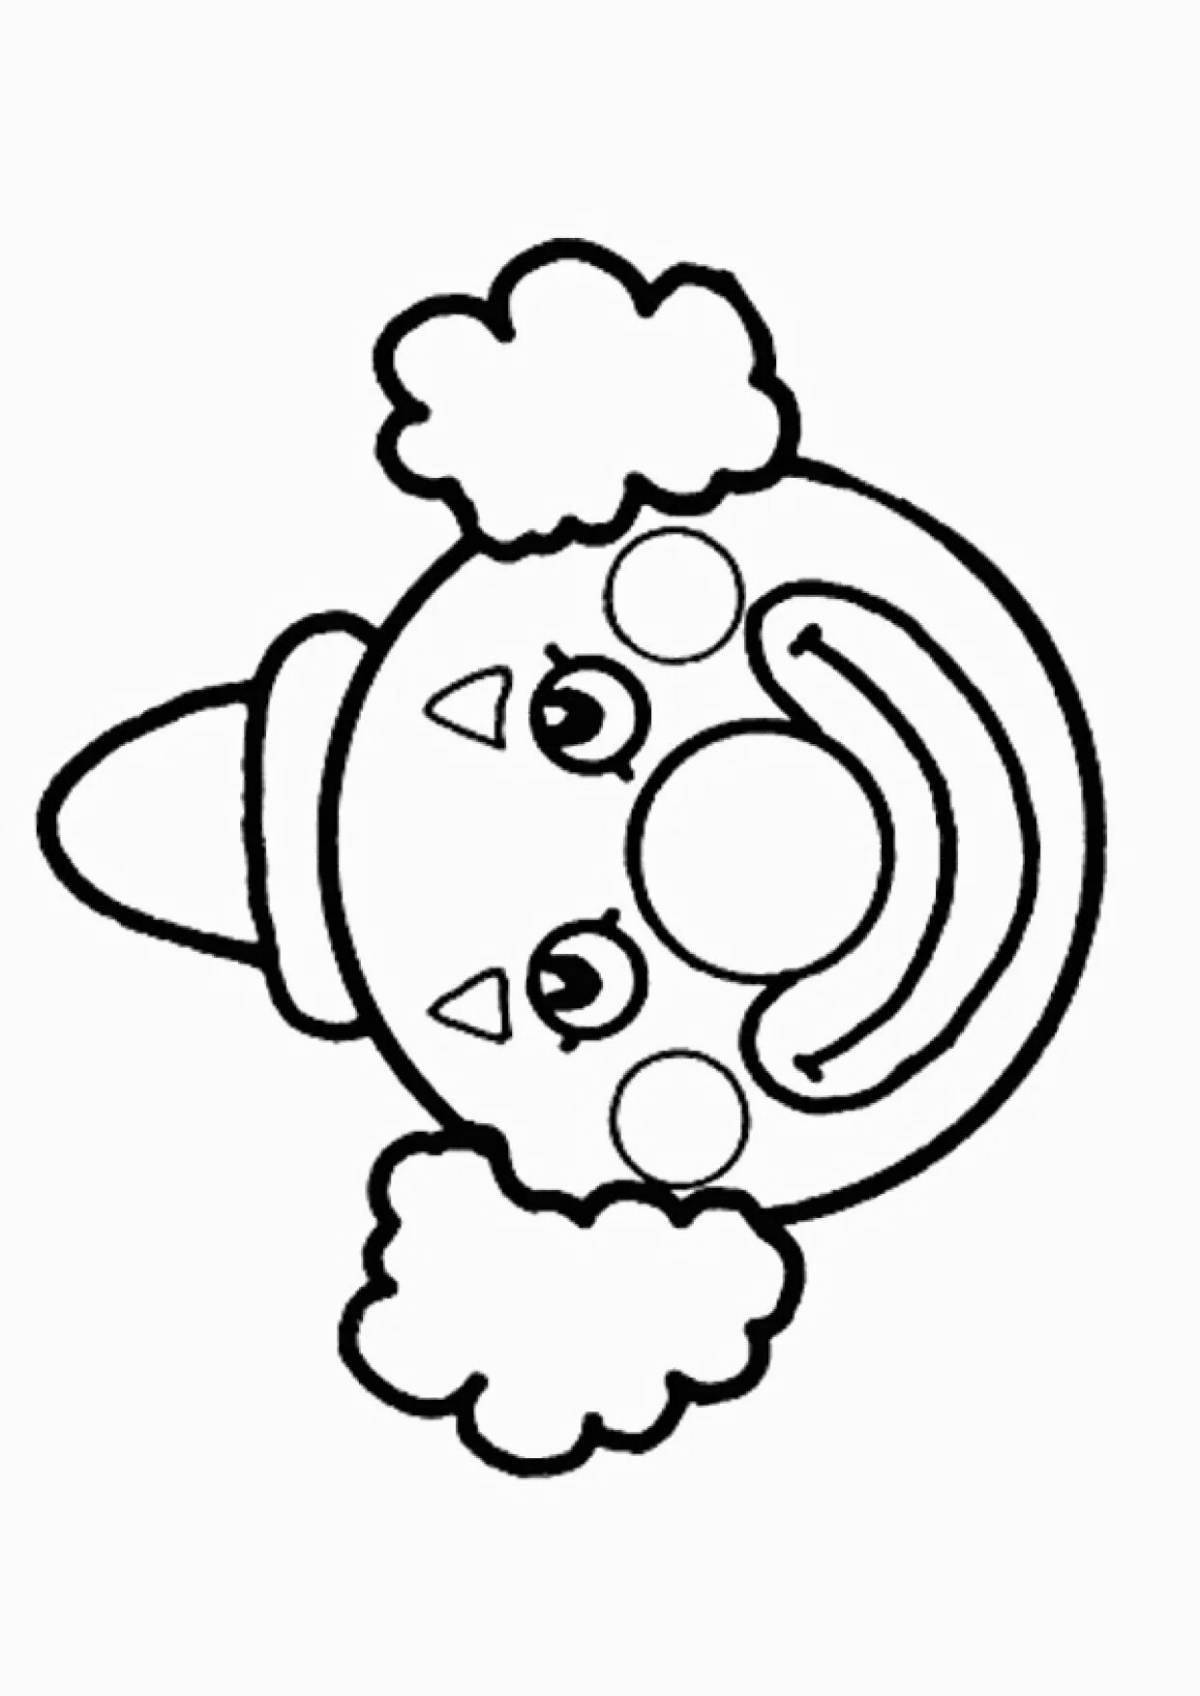 Coloring clown head coloring page